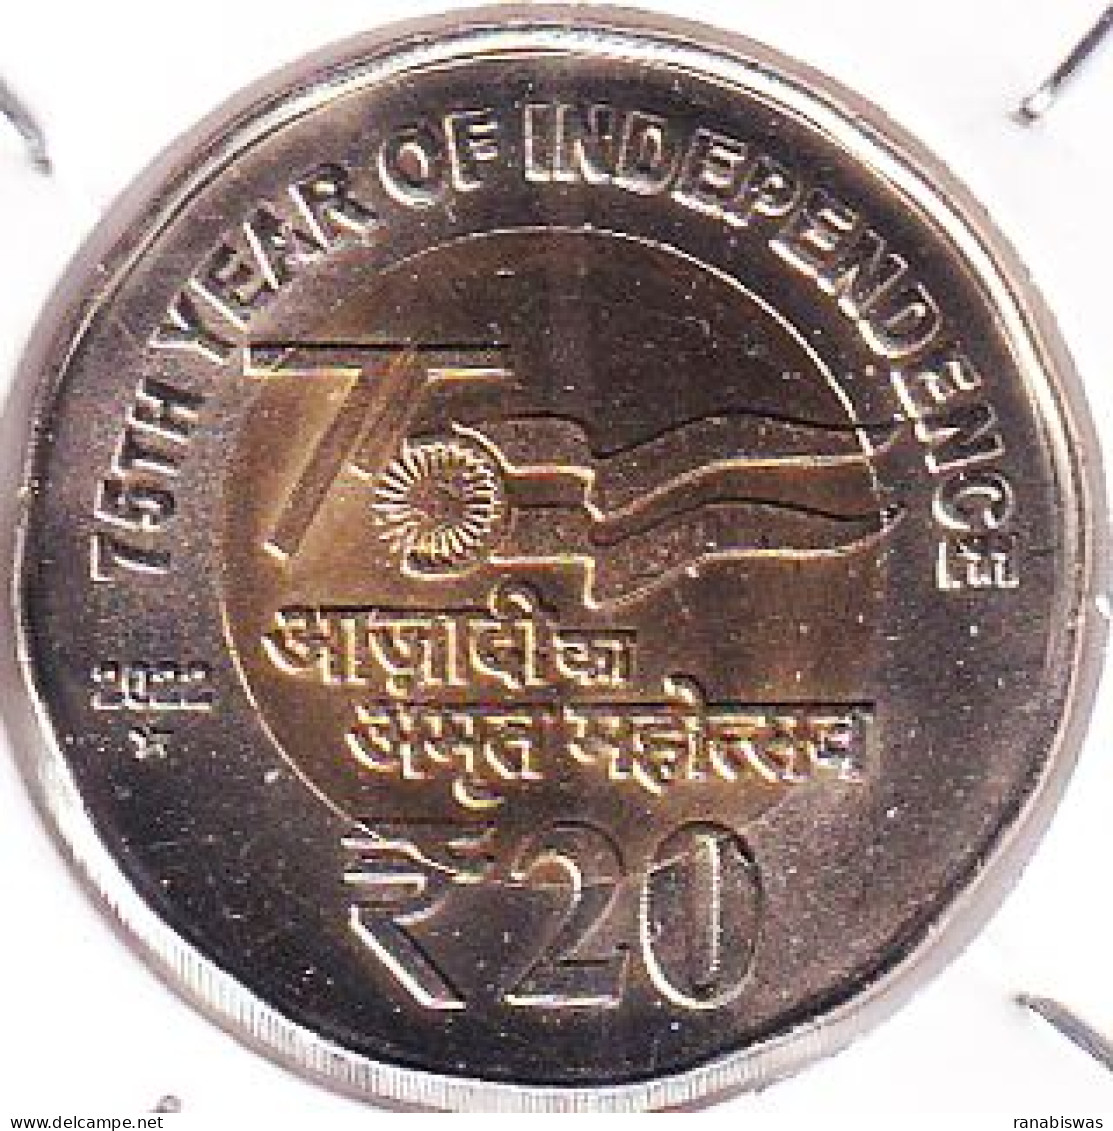 INDIA COIN LOT 444, 20 RUPEES 2022, AKAM, HYDERABAD MINT, UNC - India